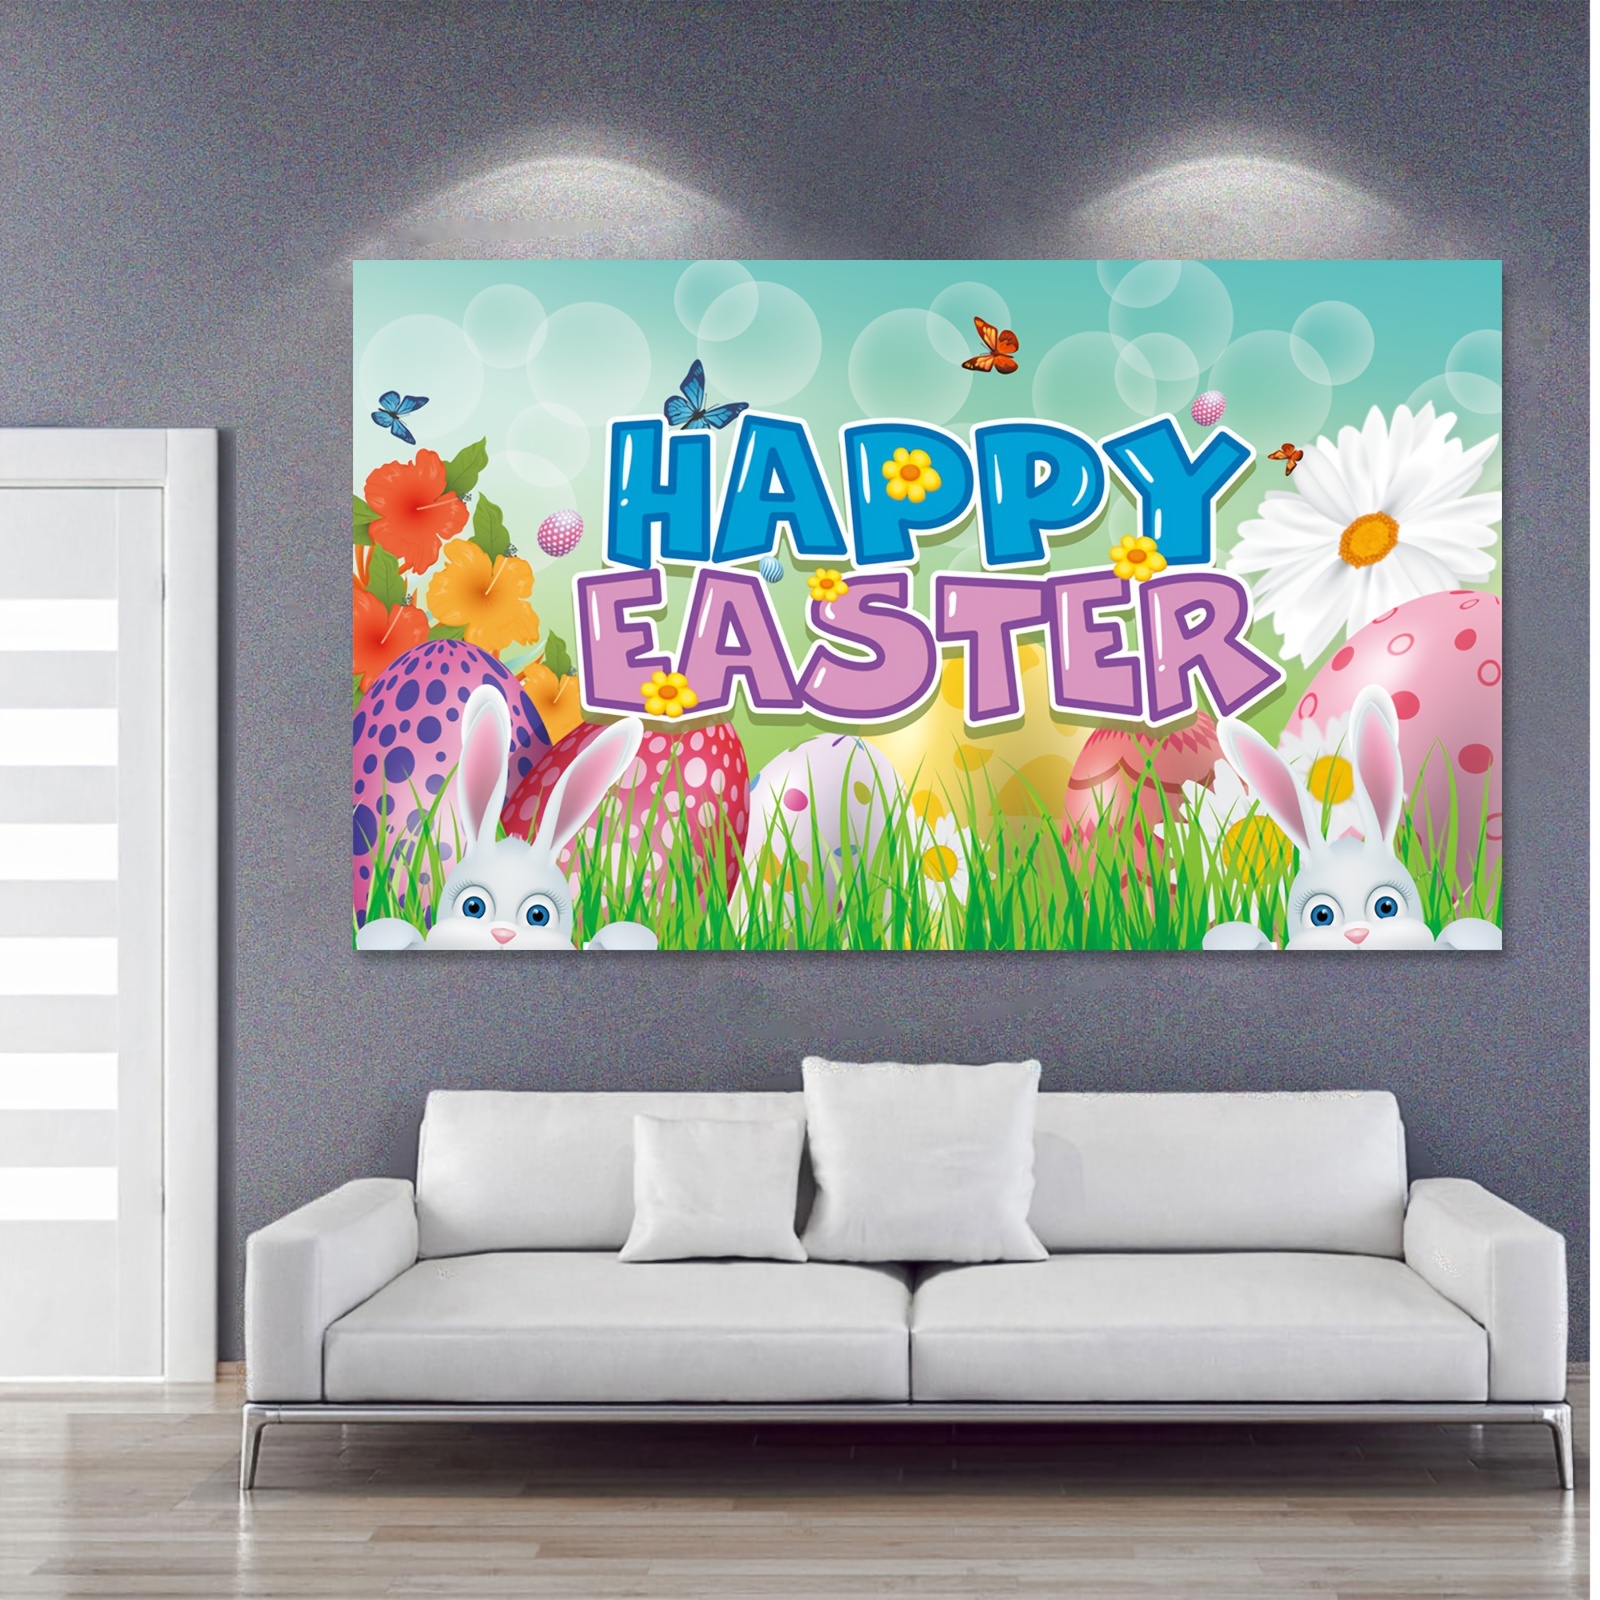 1pc 5 3ft spring easter garden photography backdrop rabbit bunny colorful eggs grass butterfly background party decoration kids children props photo booth party decor hanging home decor wall decor atmosphere decor holiday decor